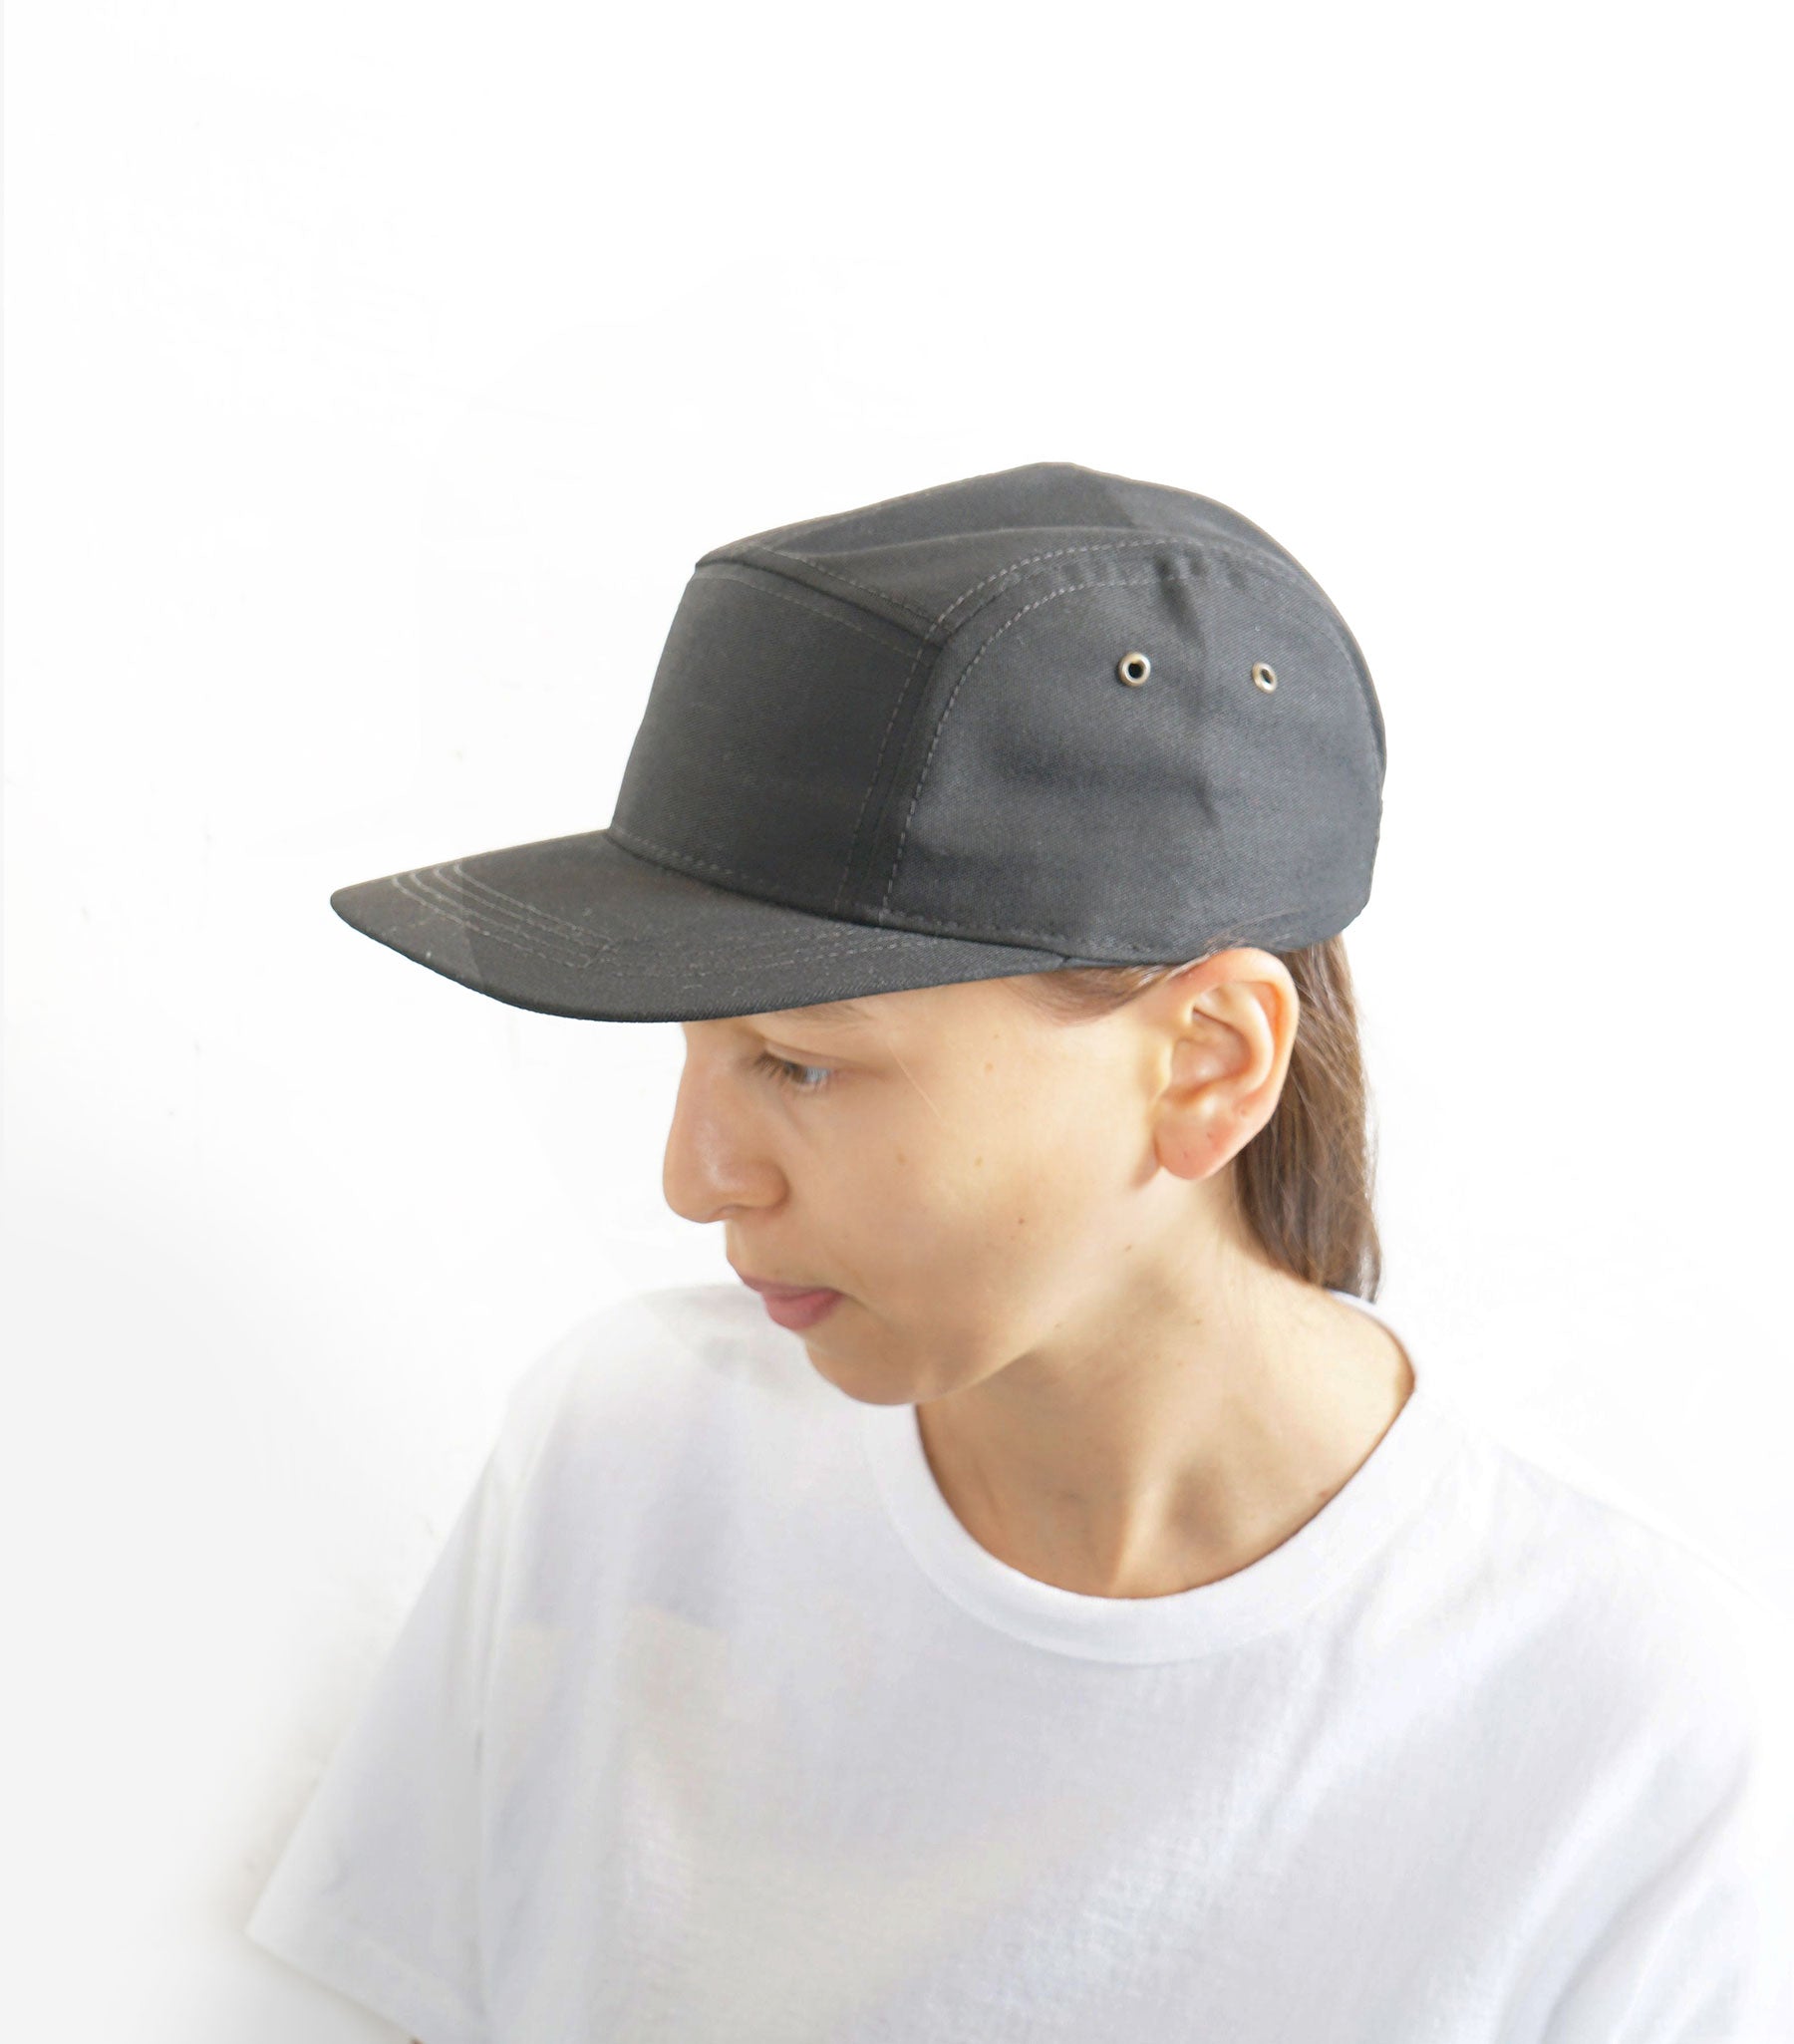 5-Panel Cap Made in USA Black